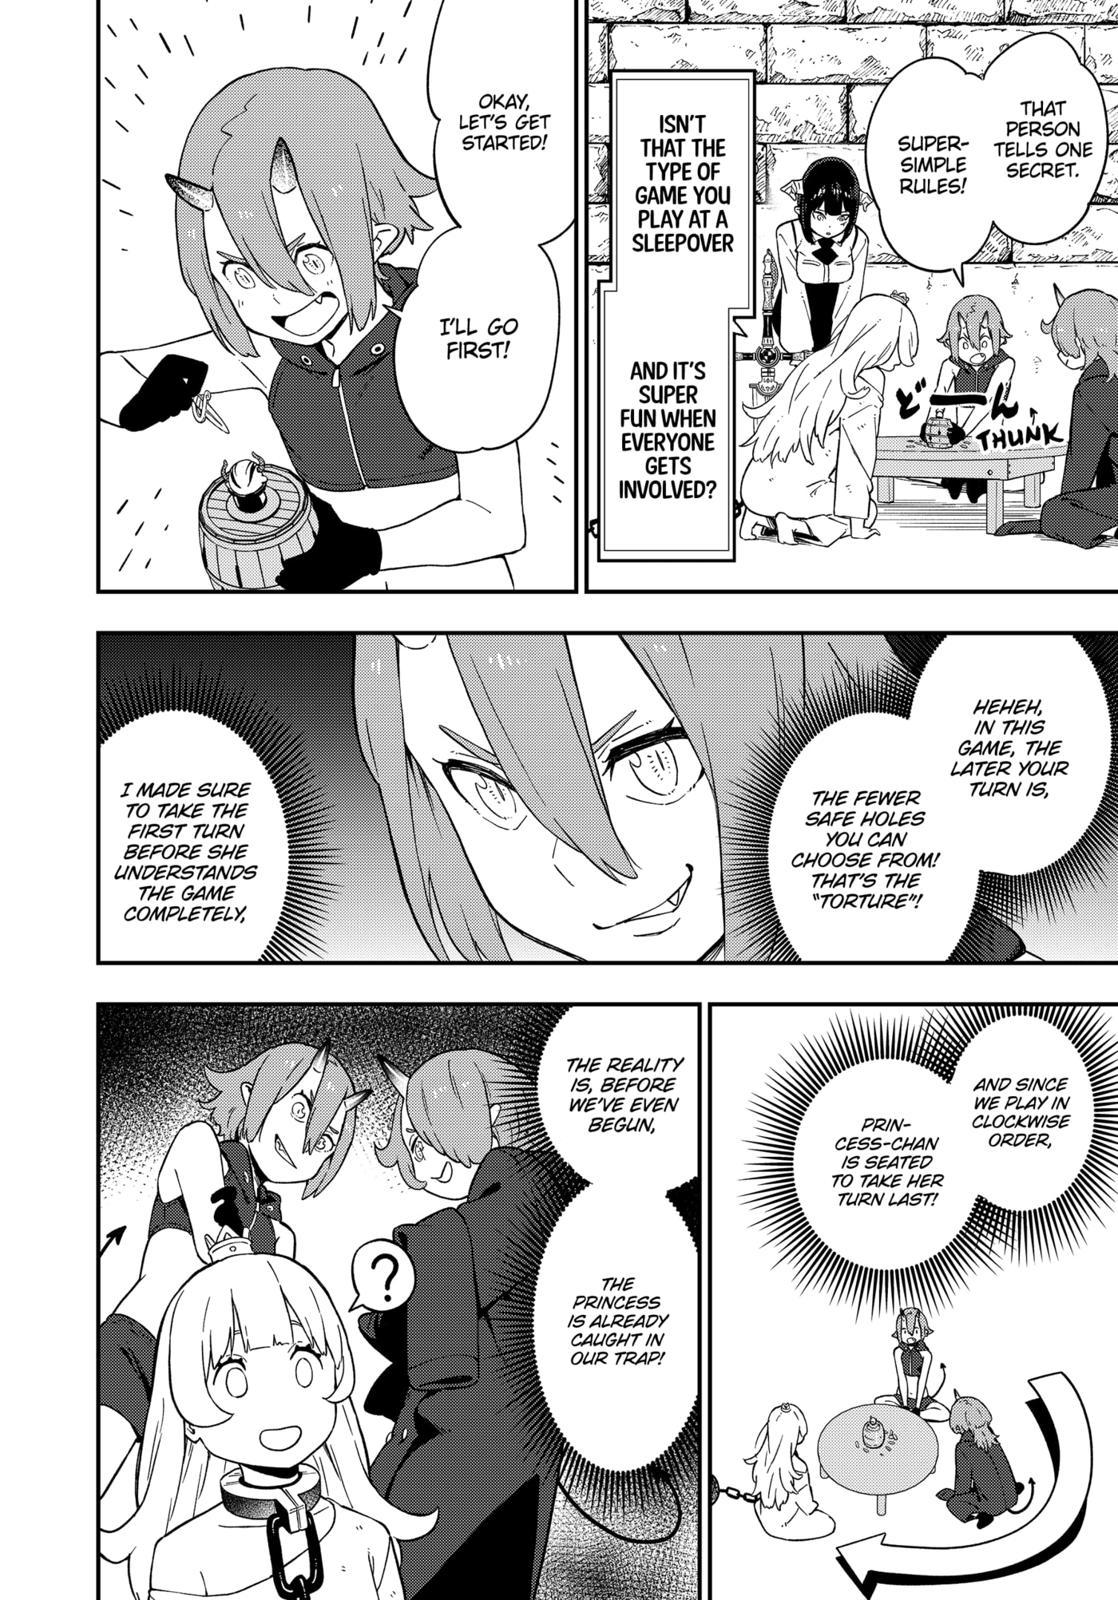 It's Time for "Interrogation", Princess! - chapter 61 - #2